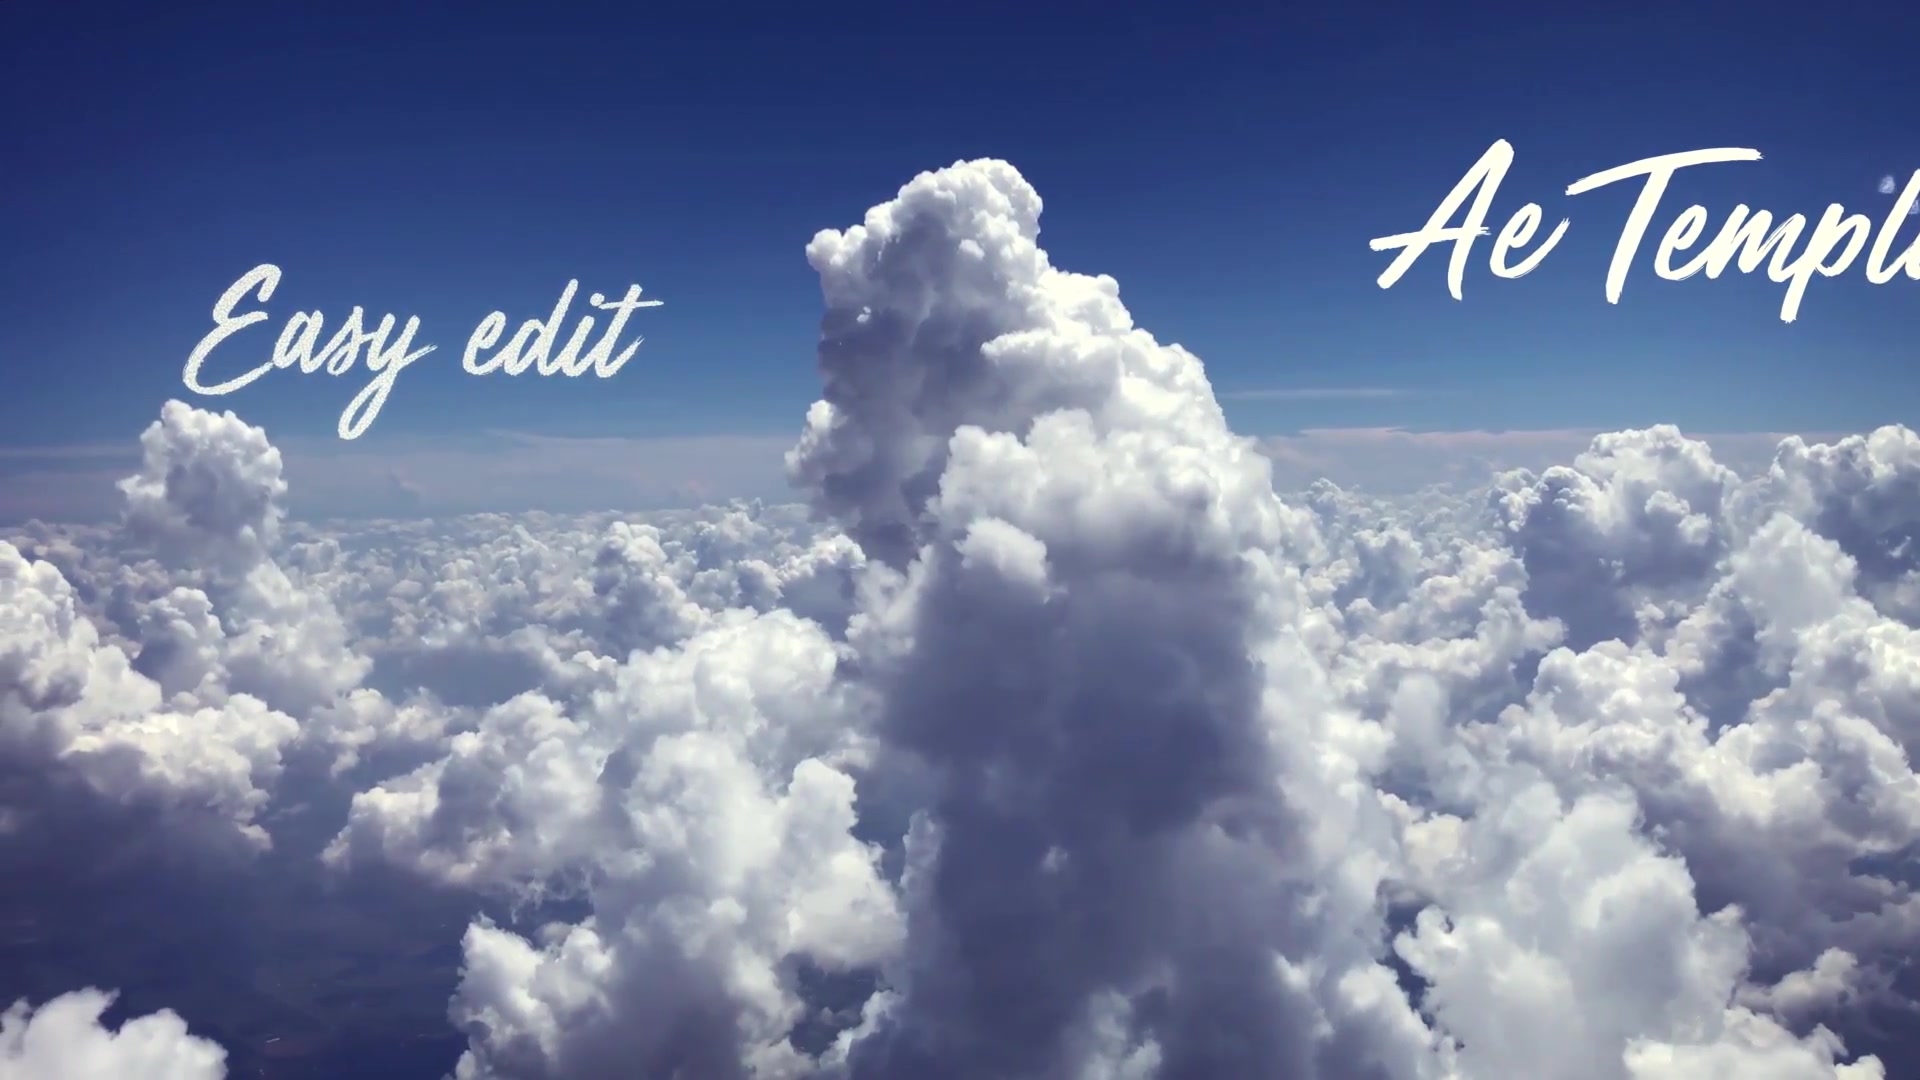 Cloud cs 2. After Effects clouds. Word cloud after Effects. Облака в after Effects. Travelers titles.